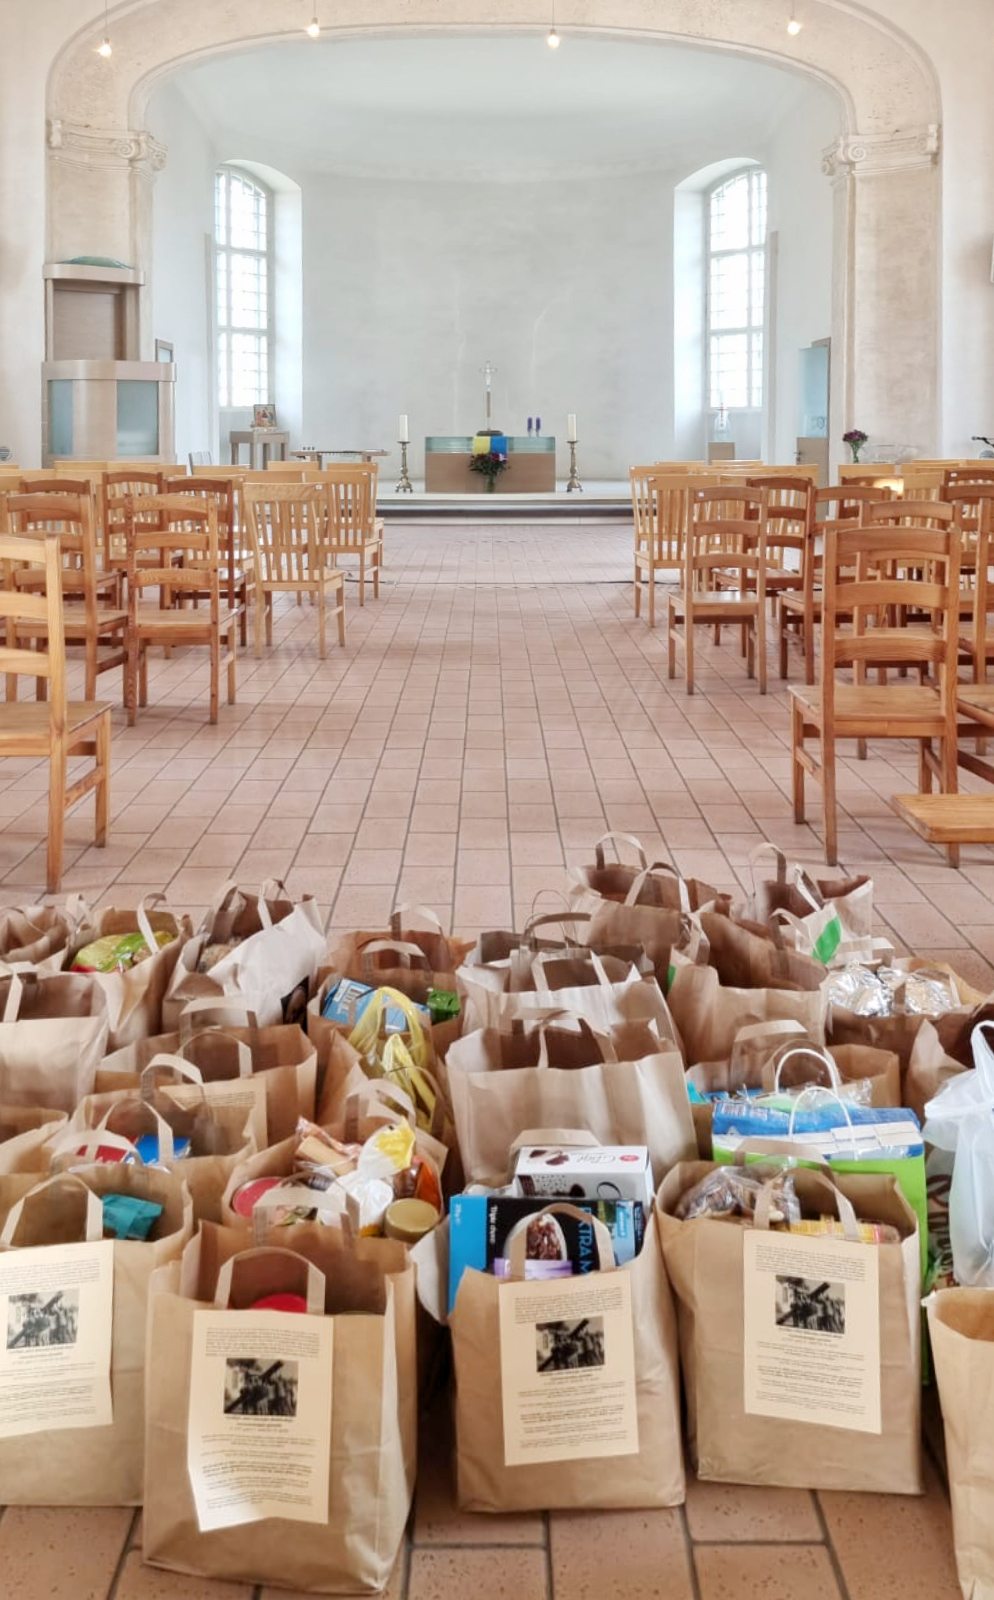 Ohio food banks have been stretched over the past year as more people battle hunger. (AdobeStock)